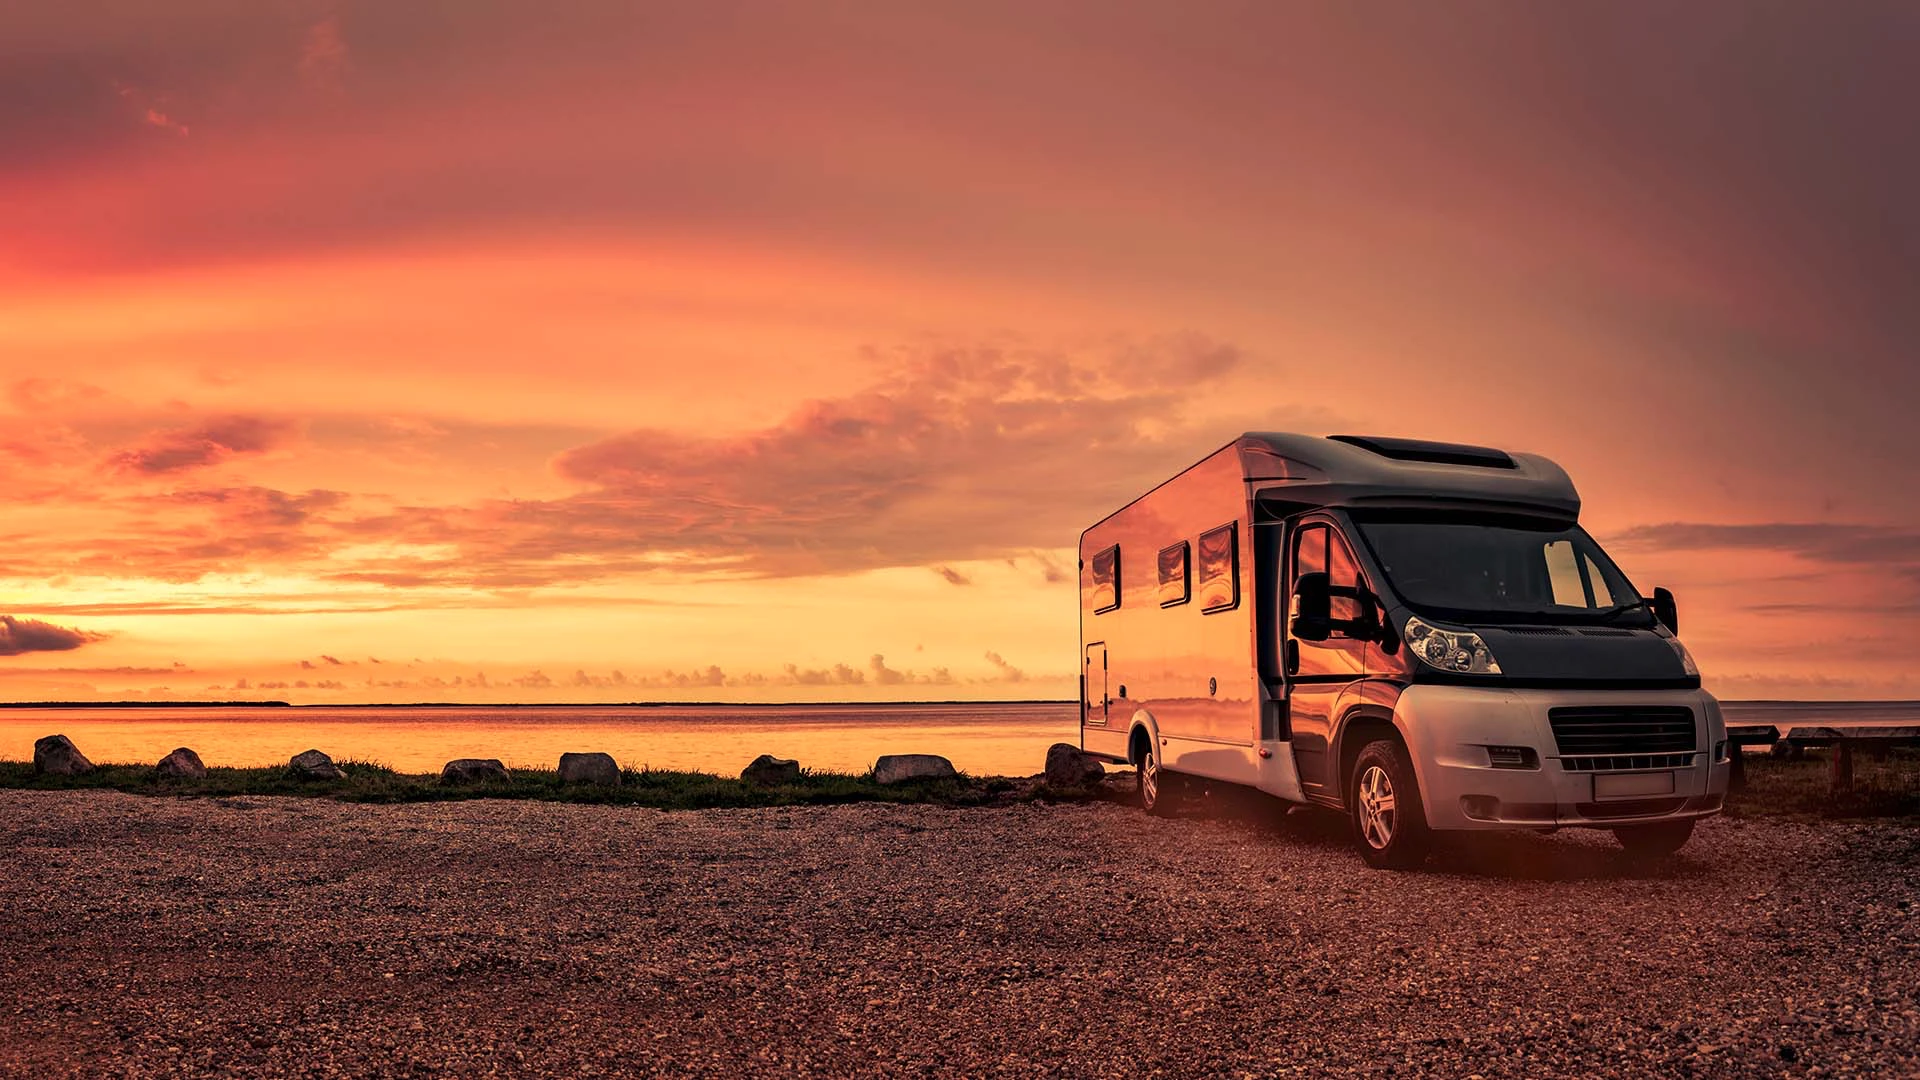 Sunset with a motorhome parked next to the sea